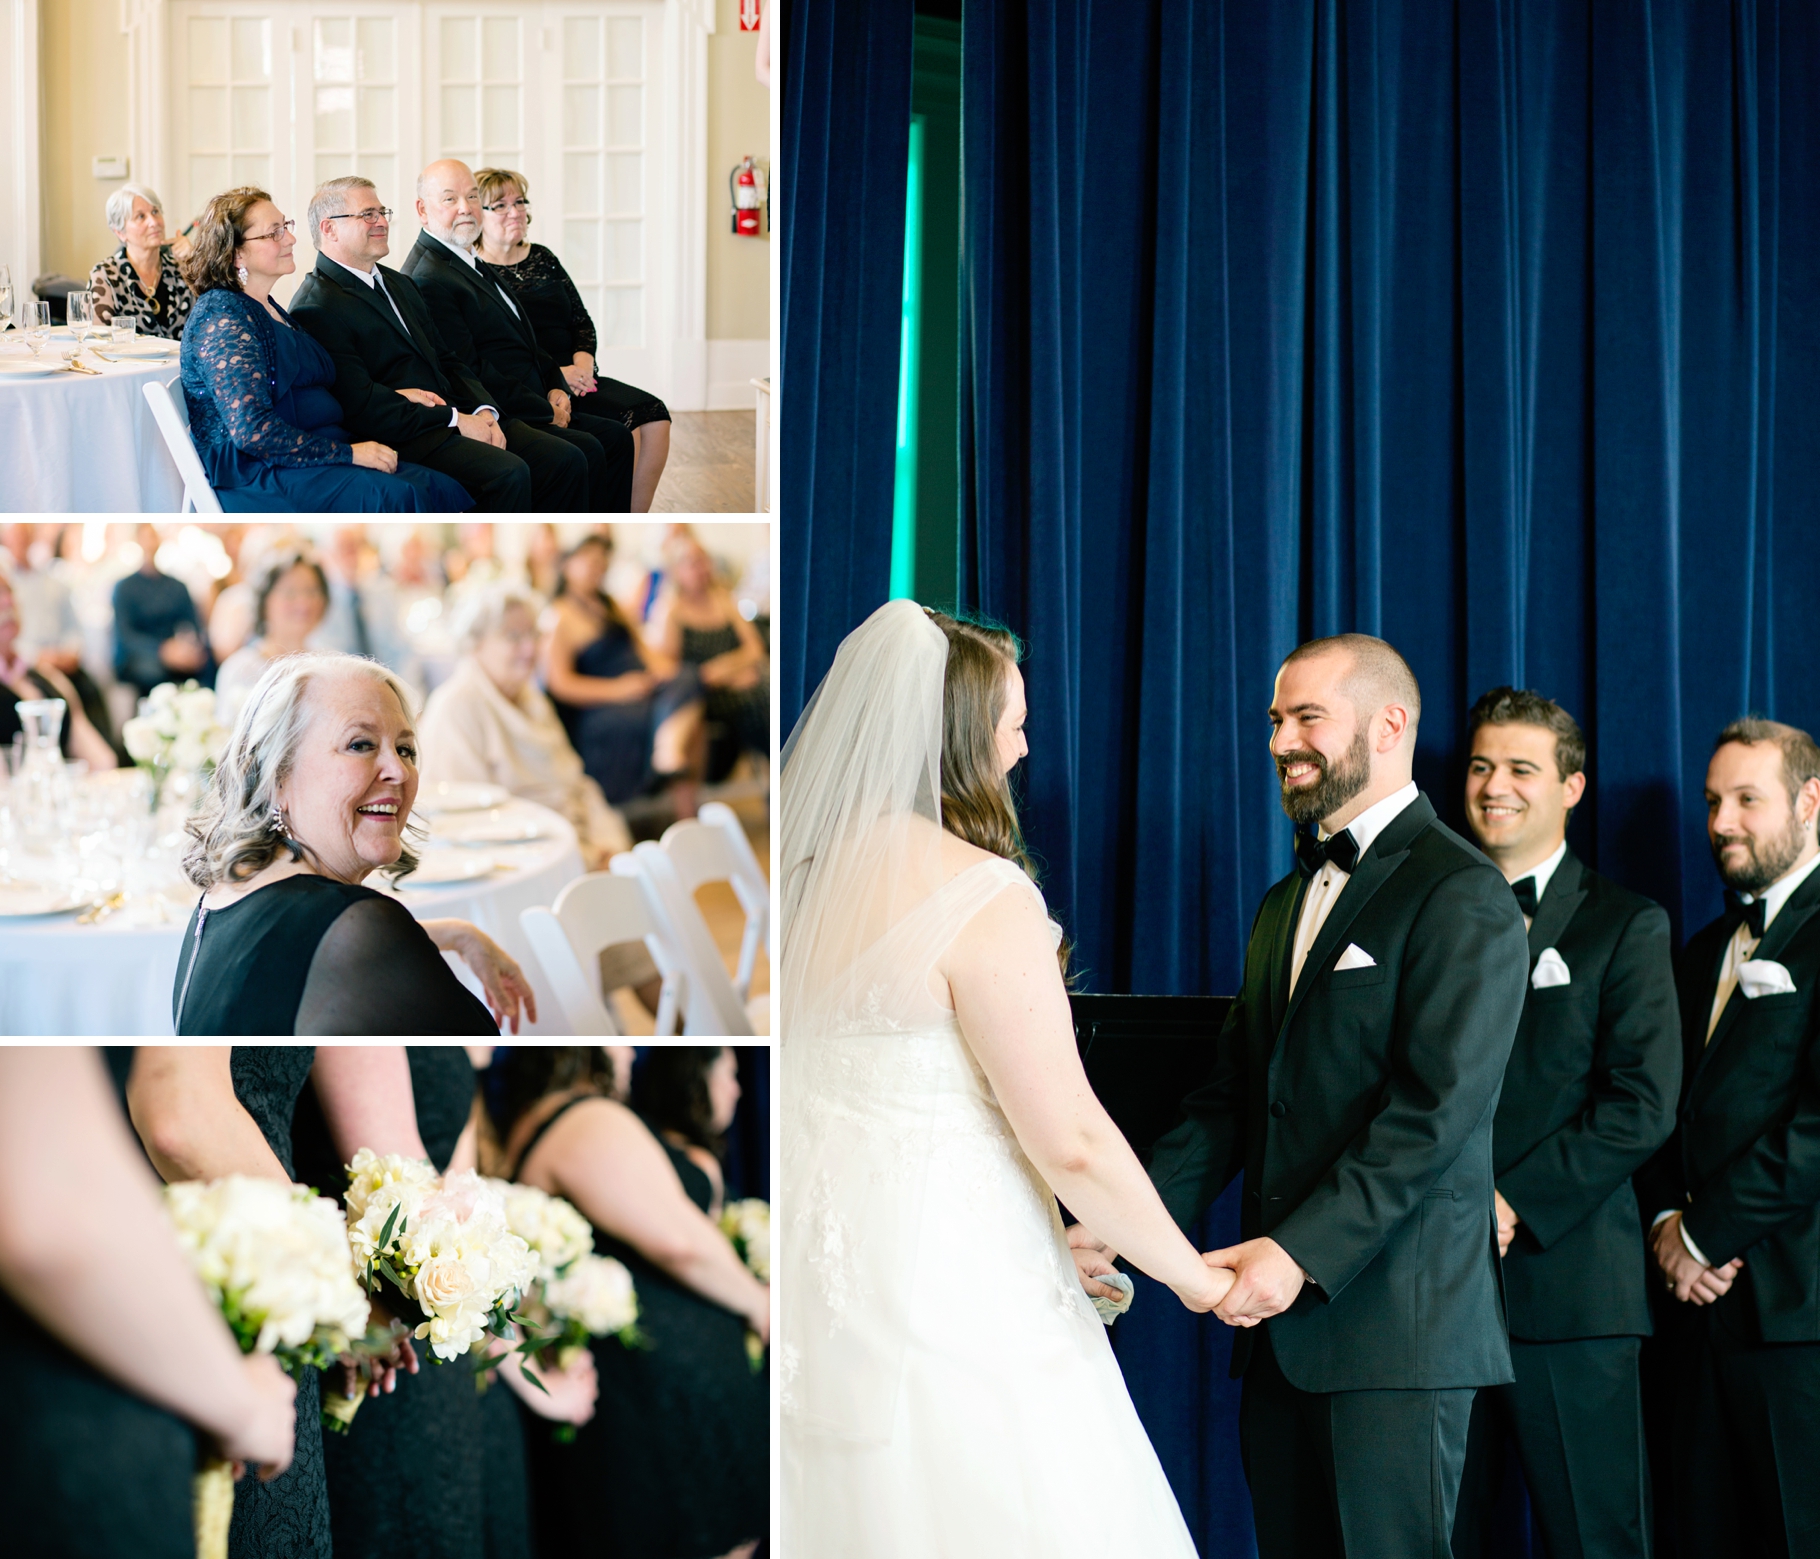 43-Bride-Groom-Ceremony-Photos-Great-Hall-Green-Lake-Seattle-Wedding-Photographer-Photography-by-Betty-Elaine